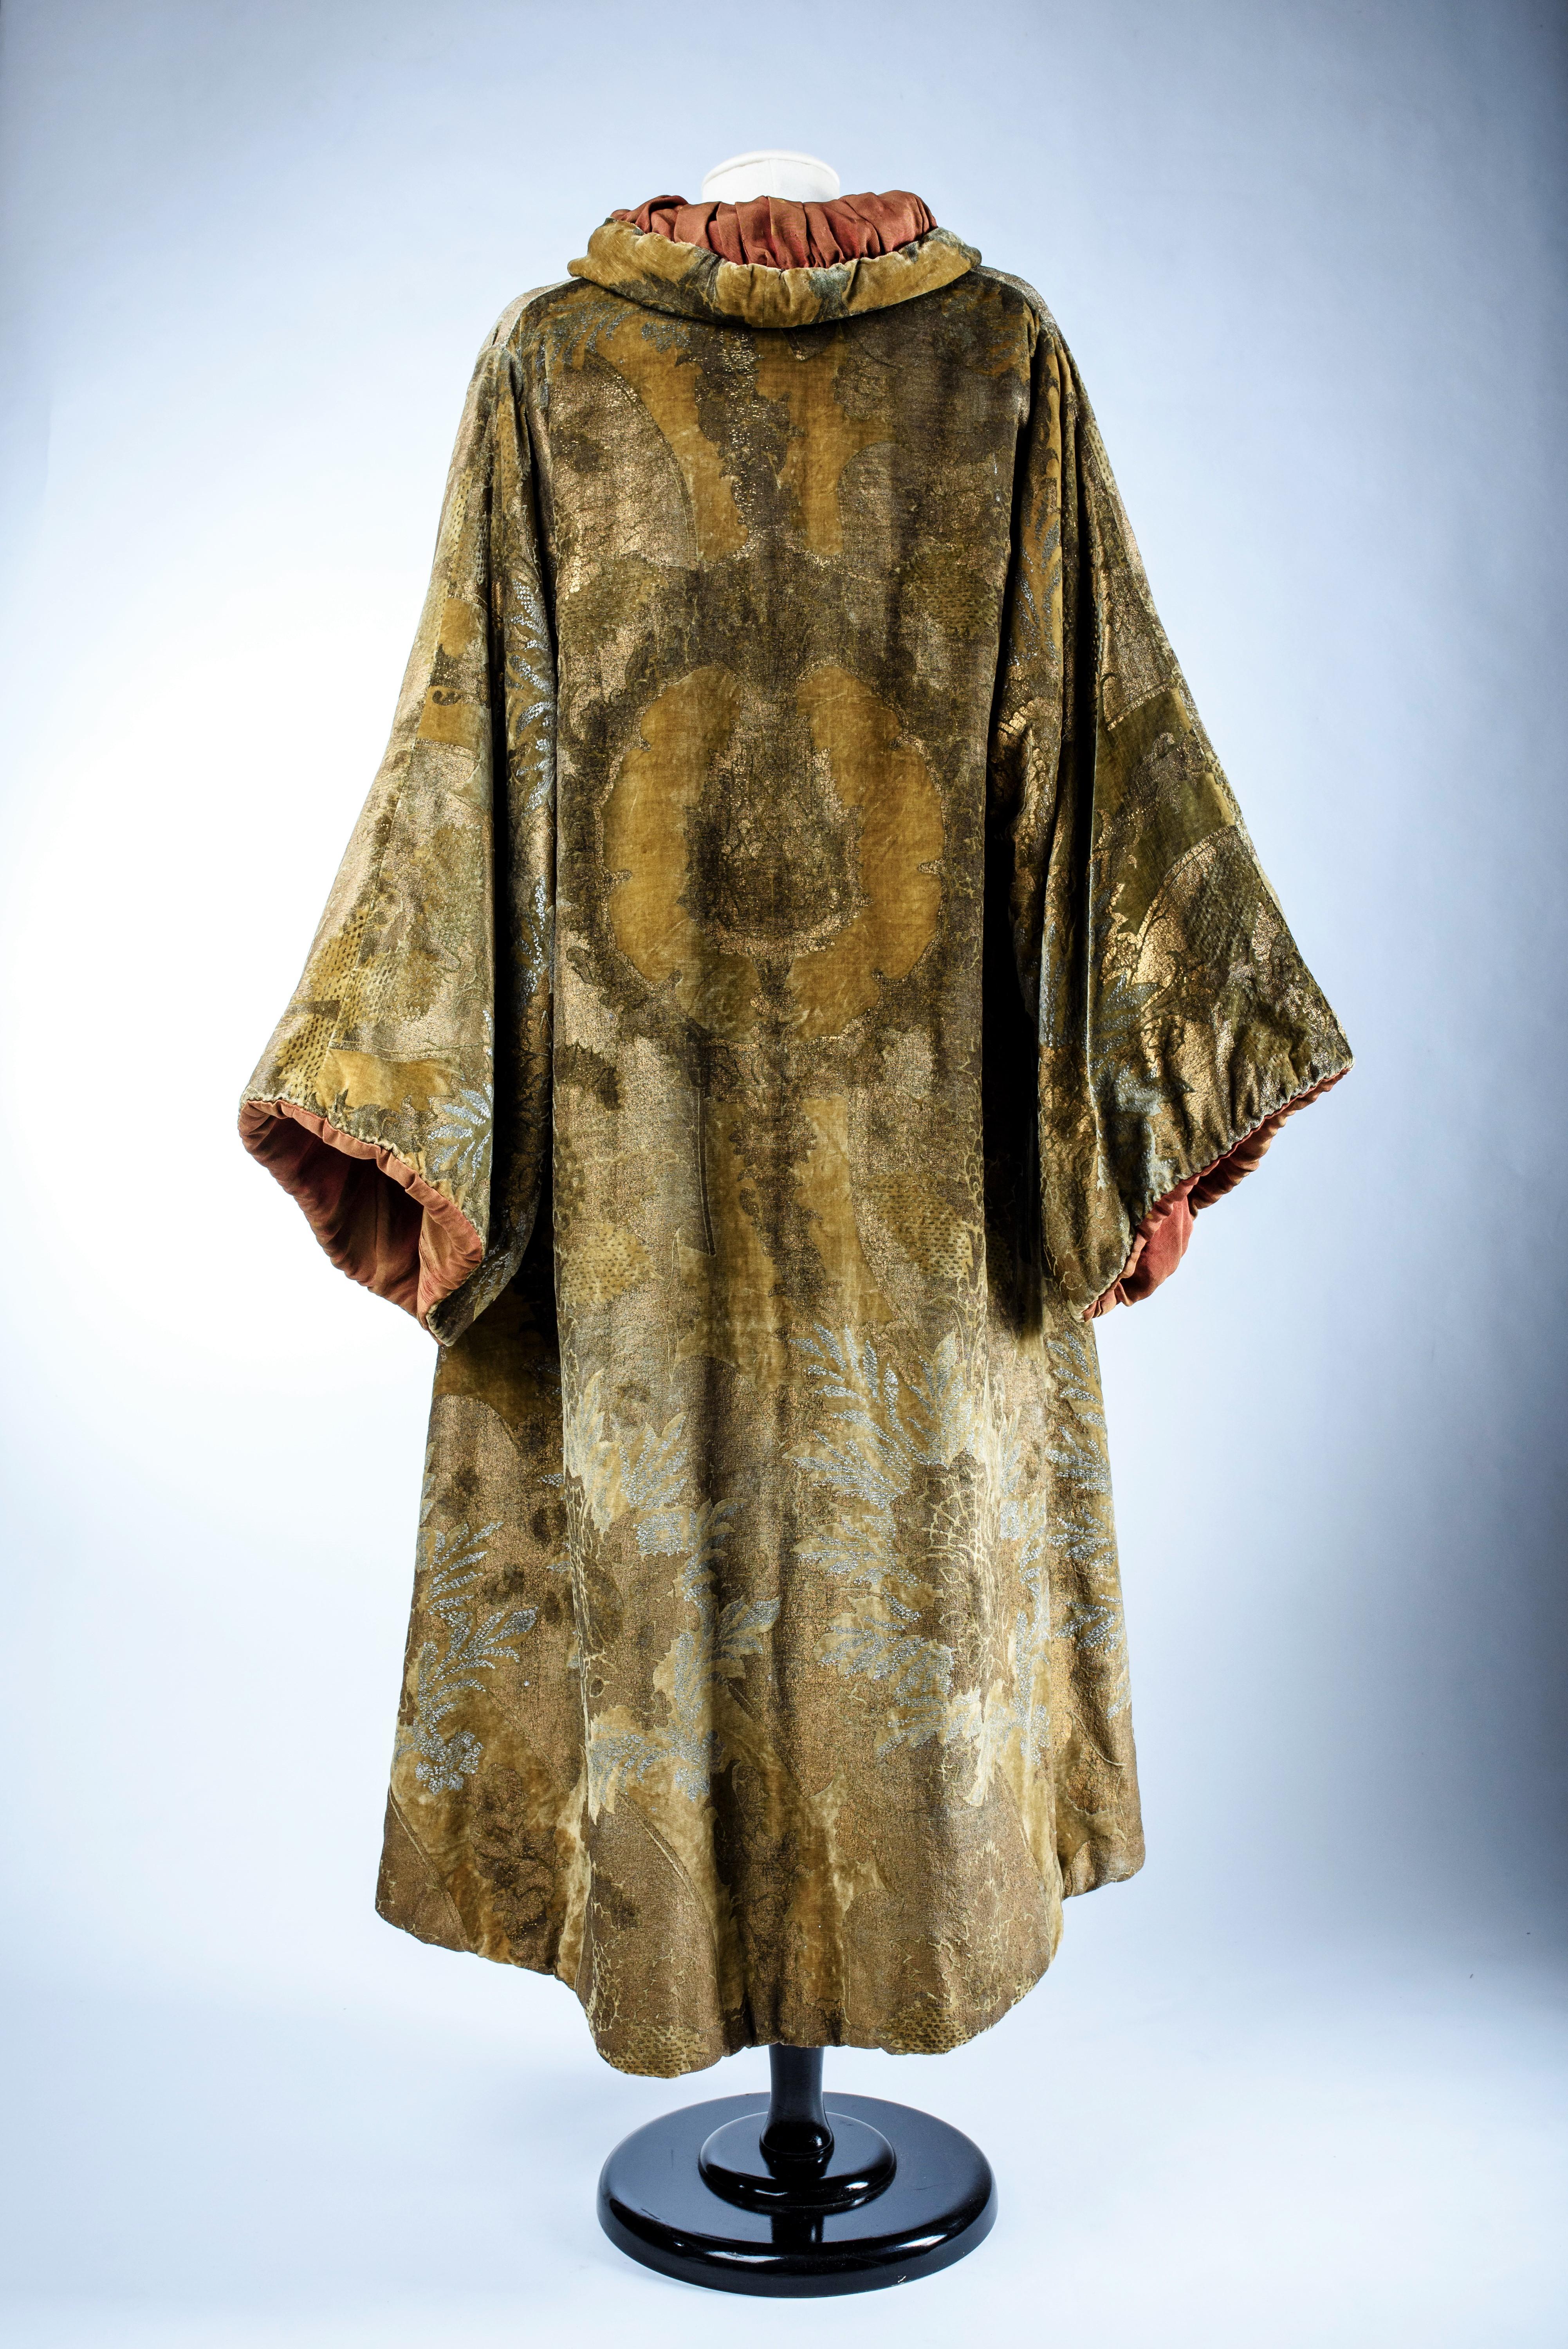 A Mariano Fortuny Gold and Silver Printed Velvet Evening Coat -Venice Circa 1925 10